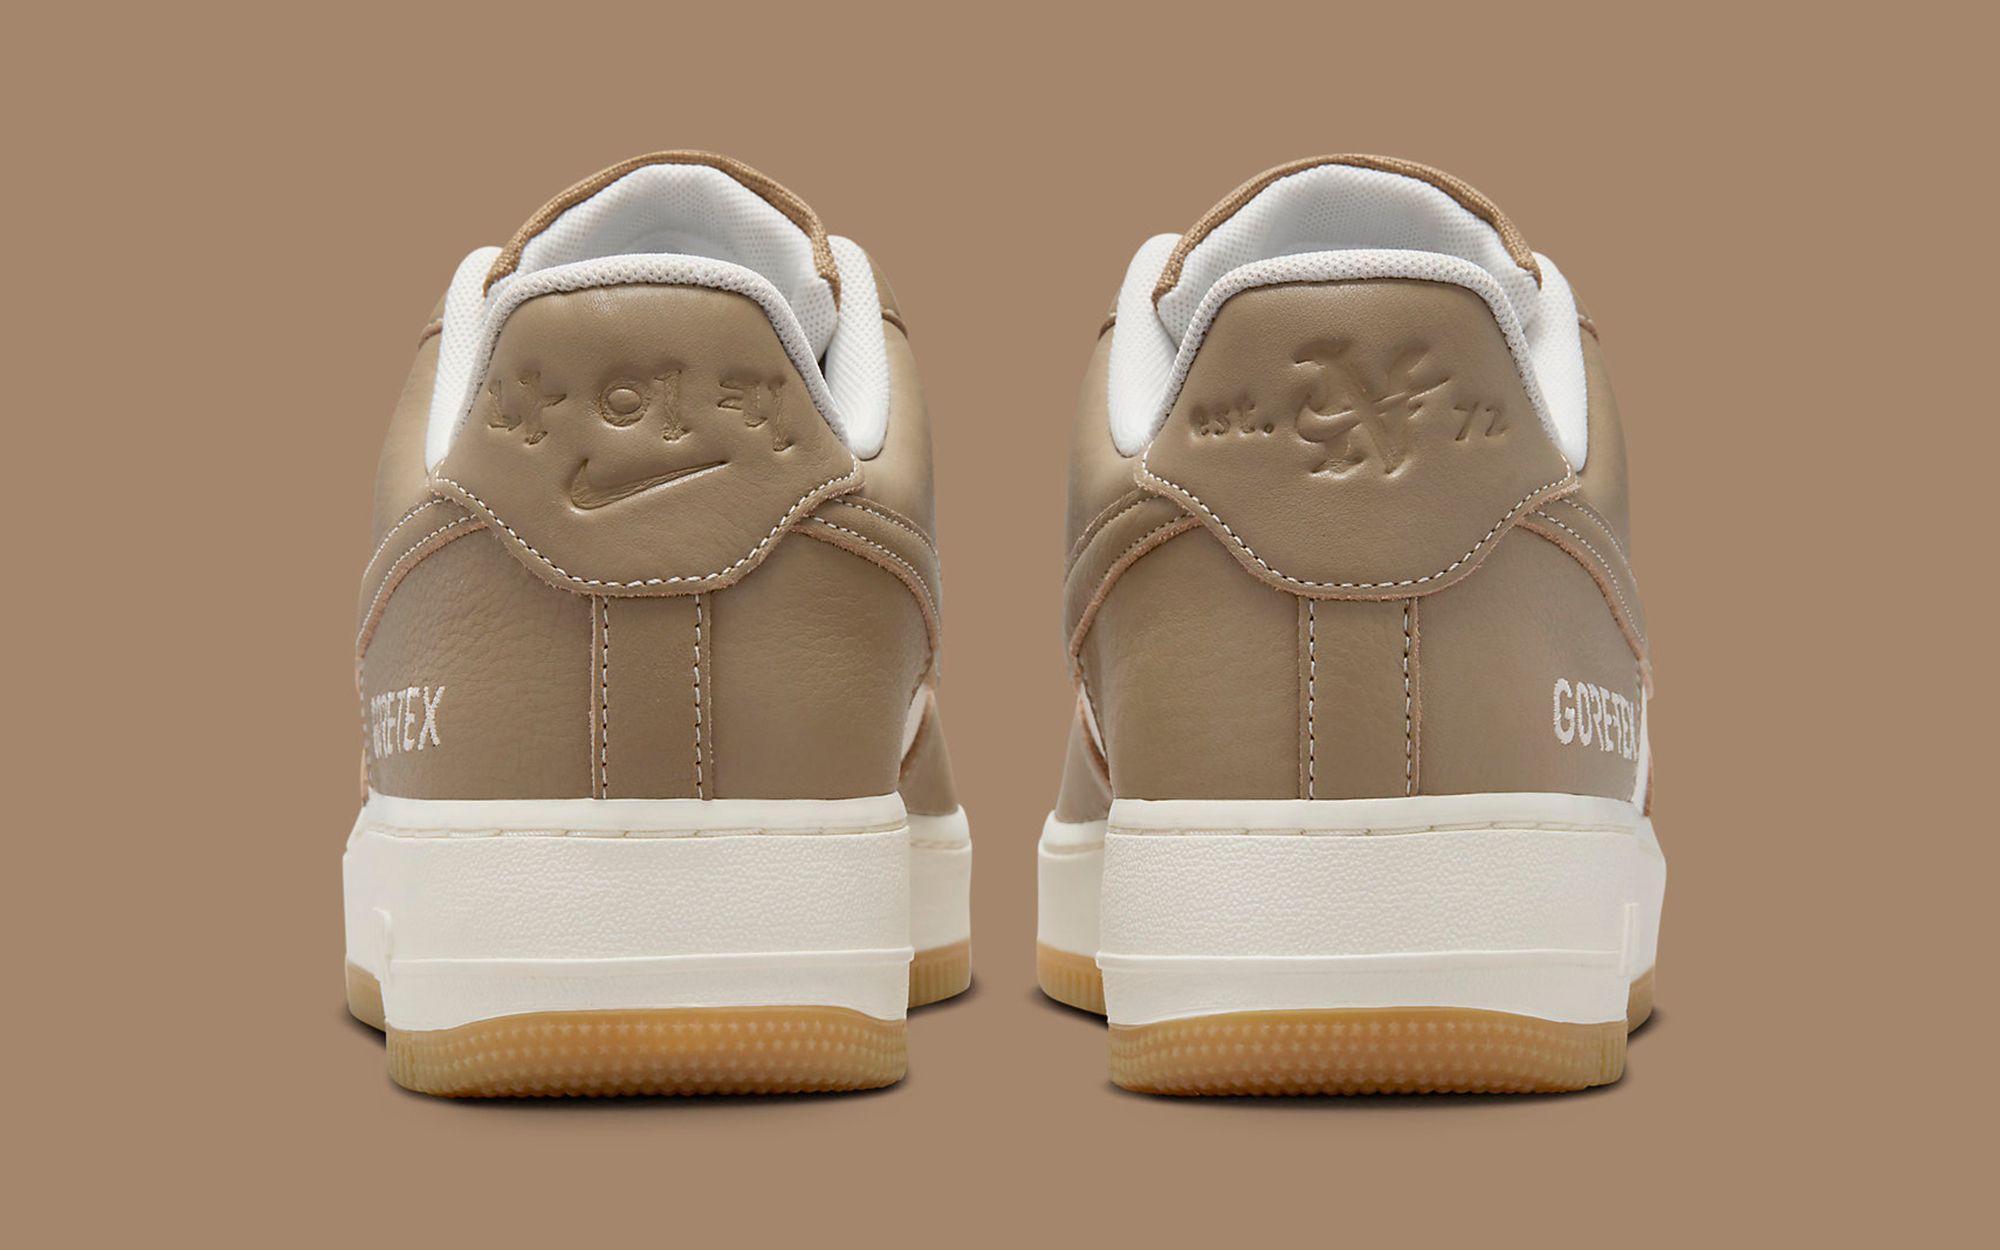 The Nike Air Force 1 Low GORE-TEX Remerges for Hangul Day | House 